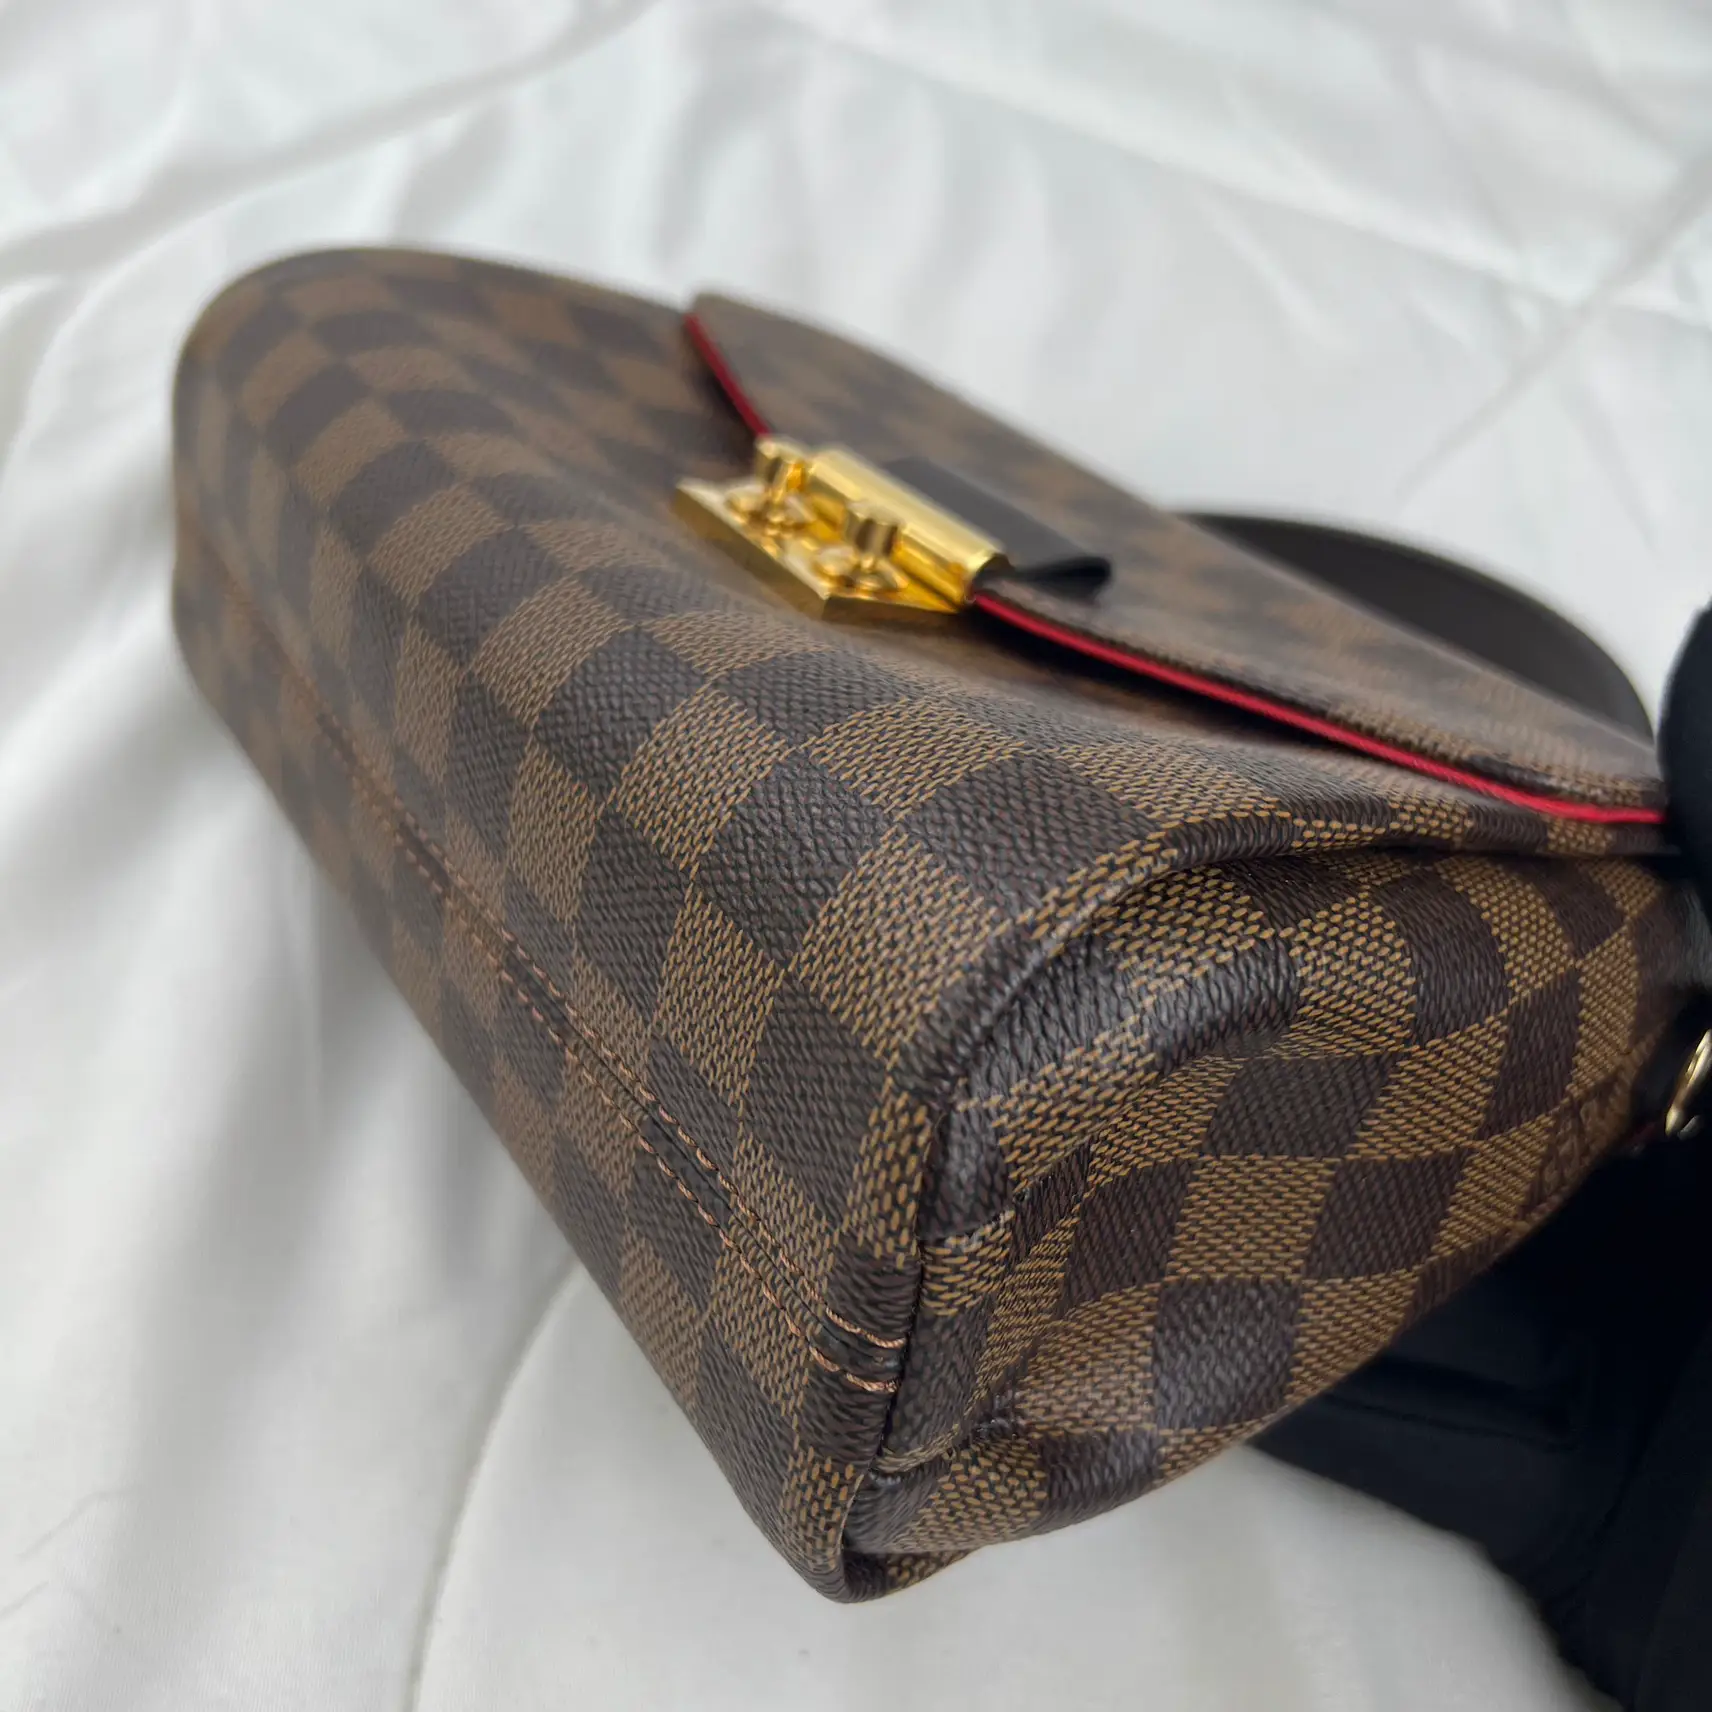 LV Croisette Bag - Why I won't be buying it 